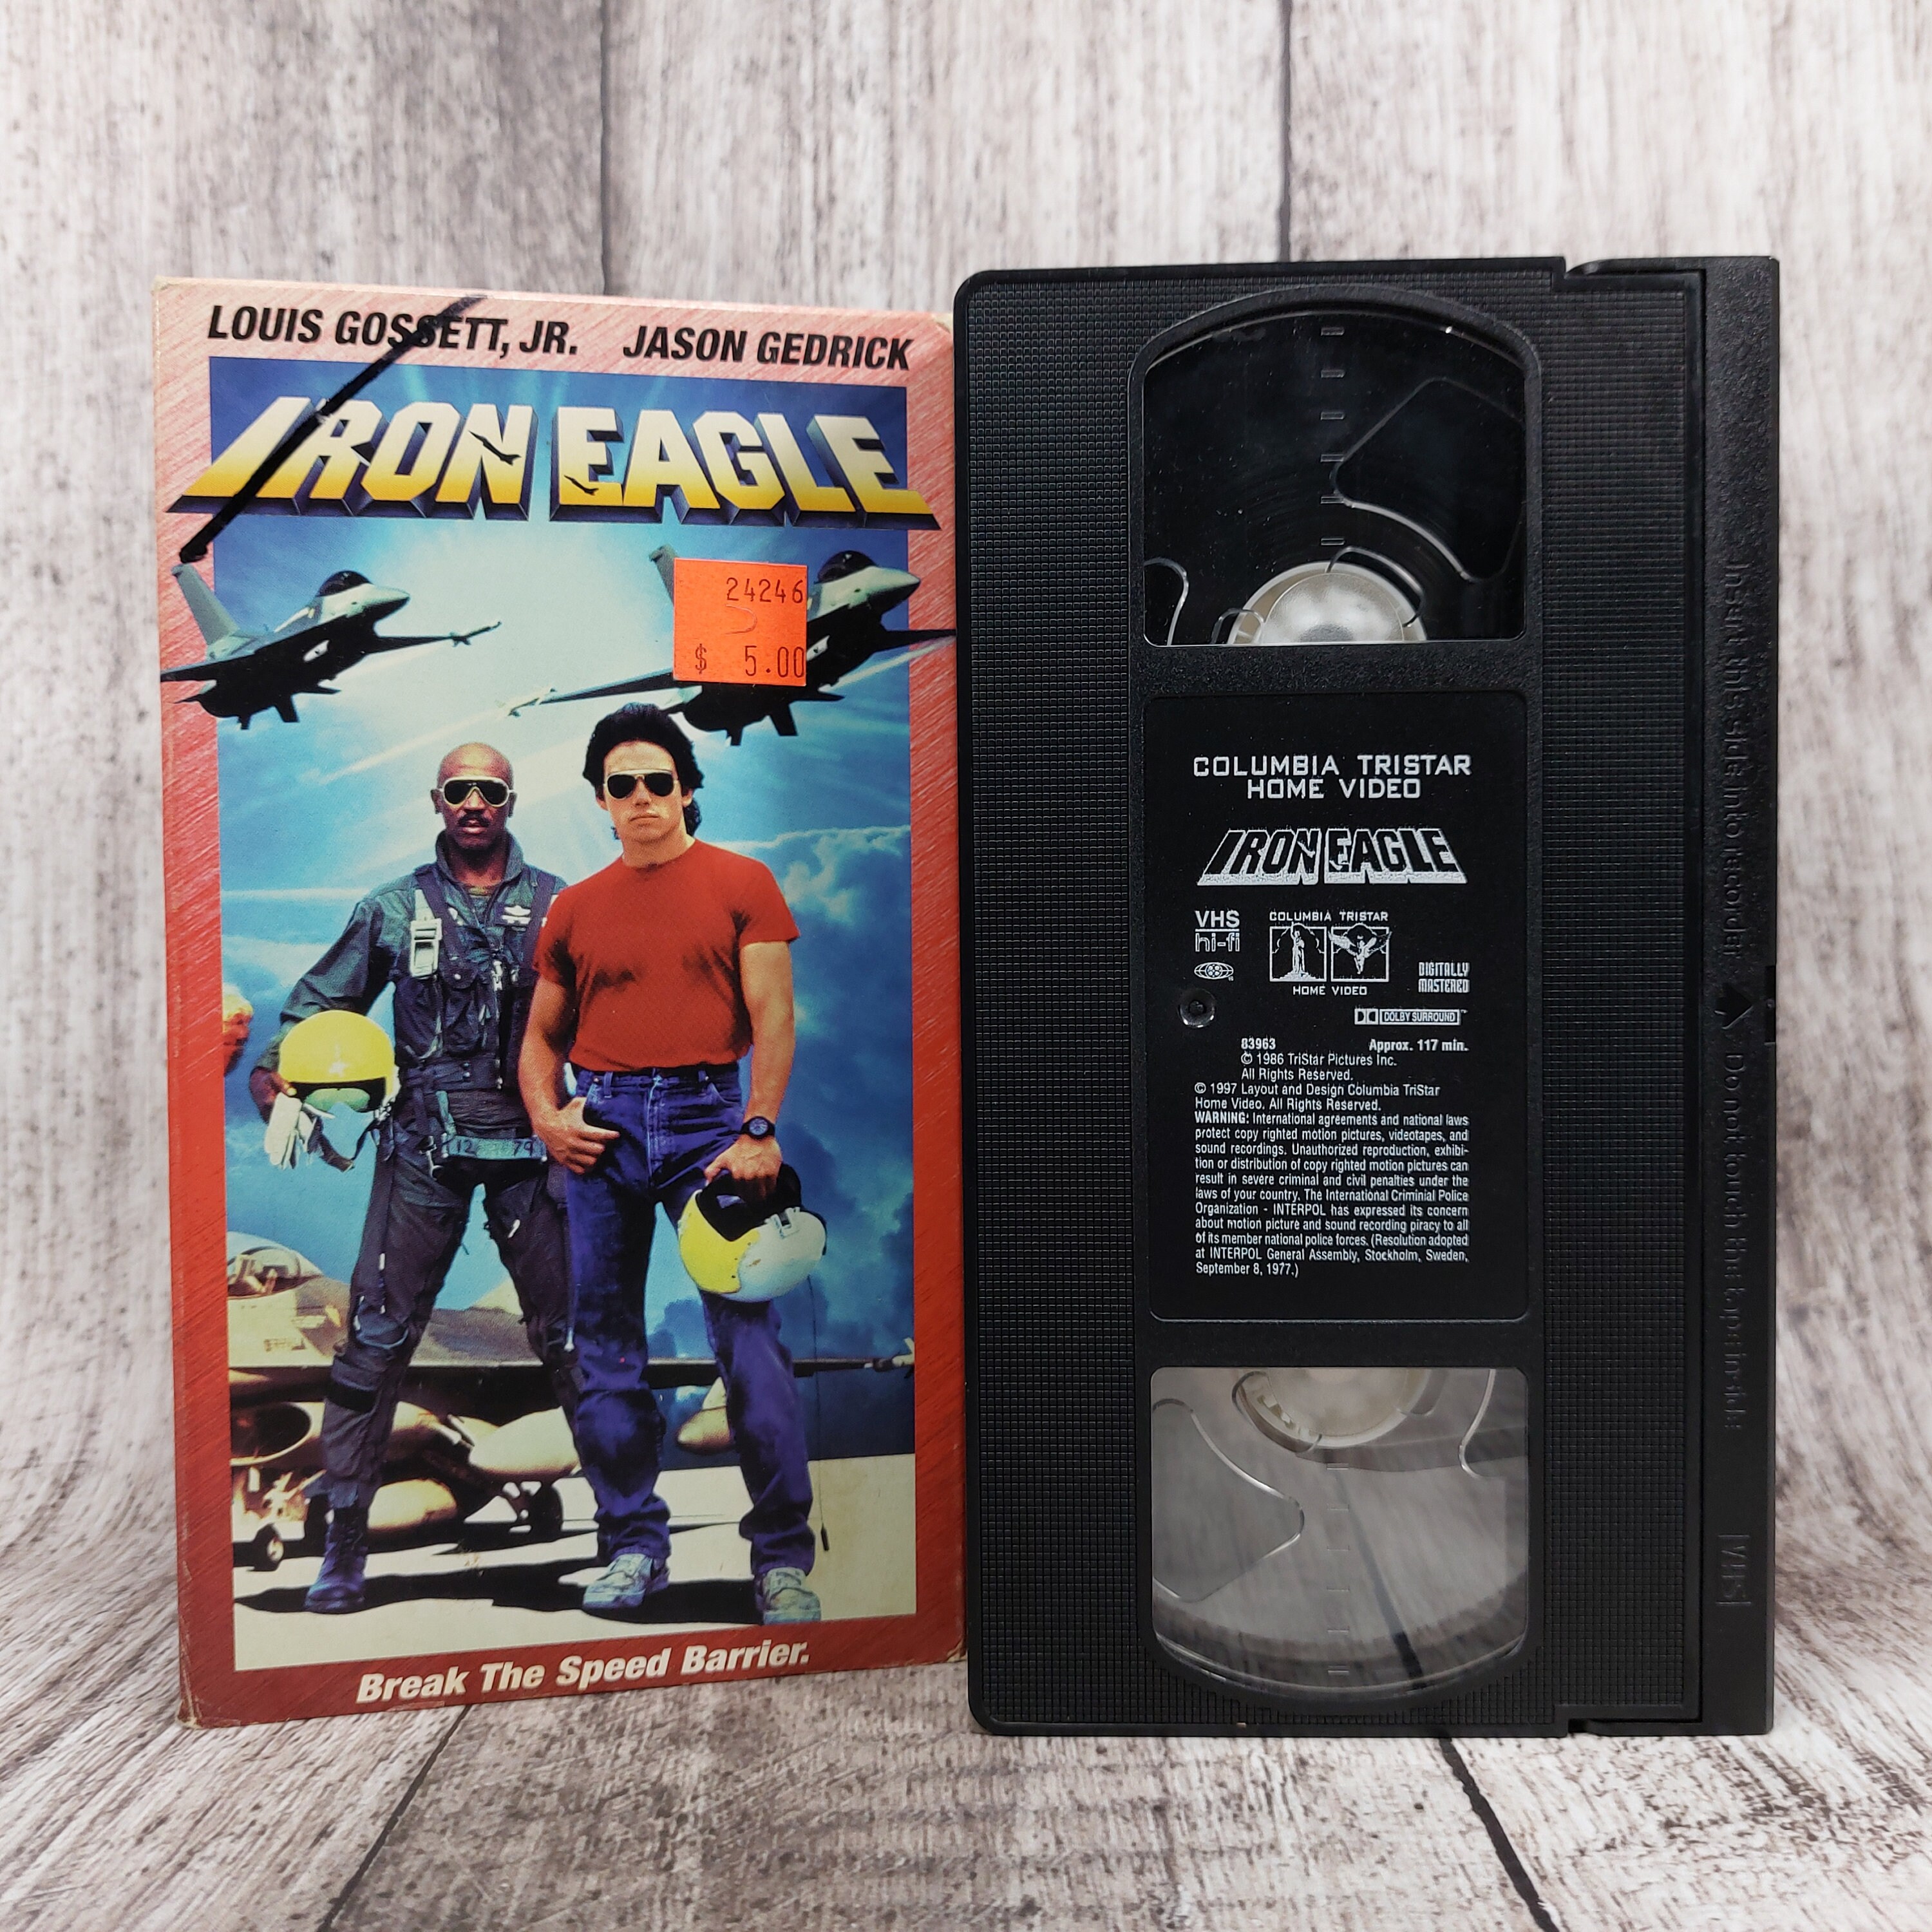 Iron Eagle (1986) | Vintage Used VHS Tape | Free Shipping on Eligible  Orders!